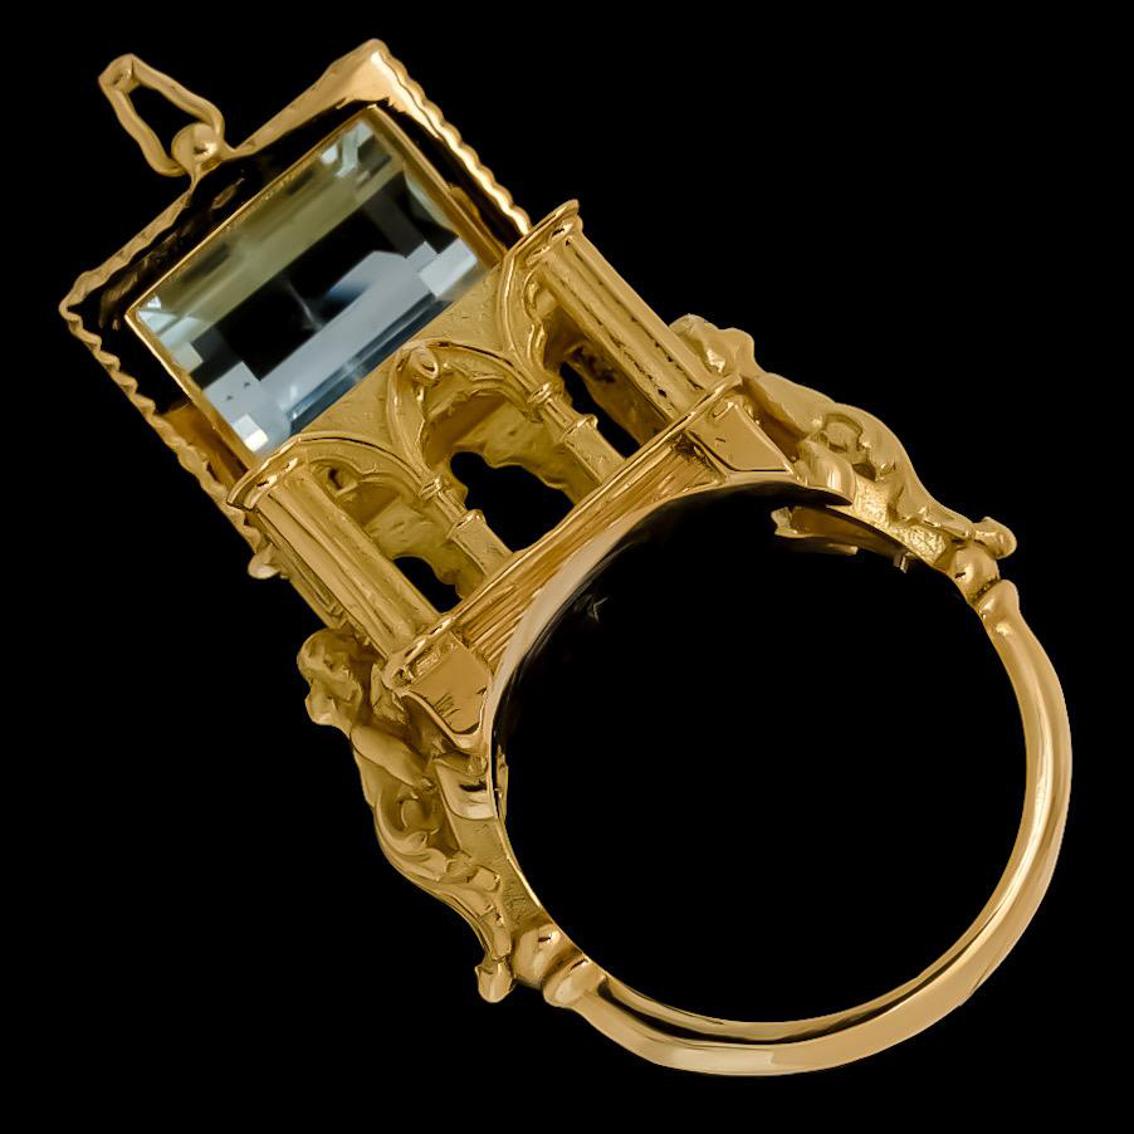 Galerie des Glaces Cathedral Poison Ring in 18 Karat Yellow Gold with Aquamarine 3